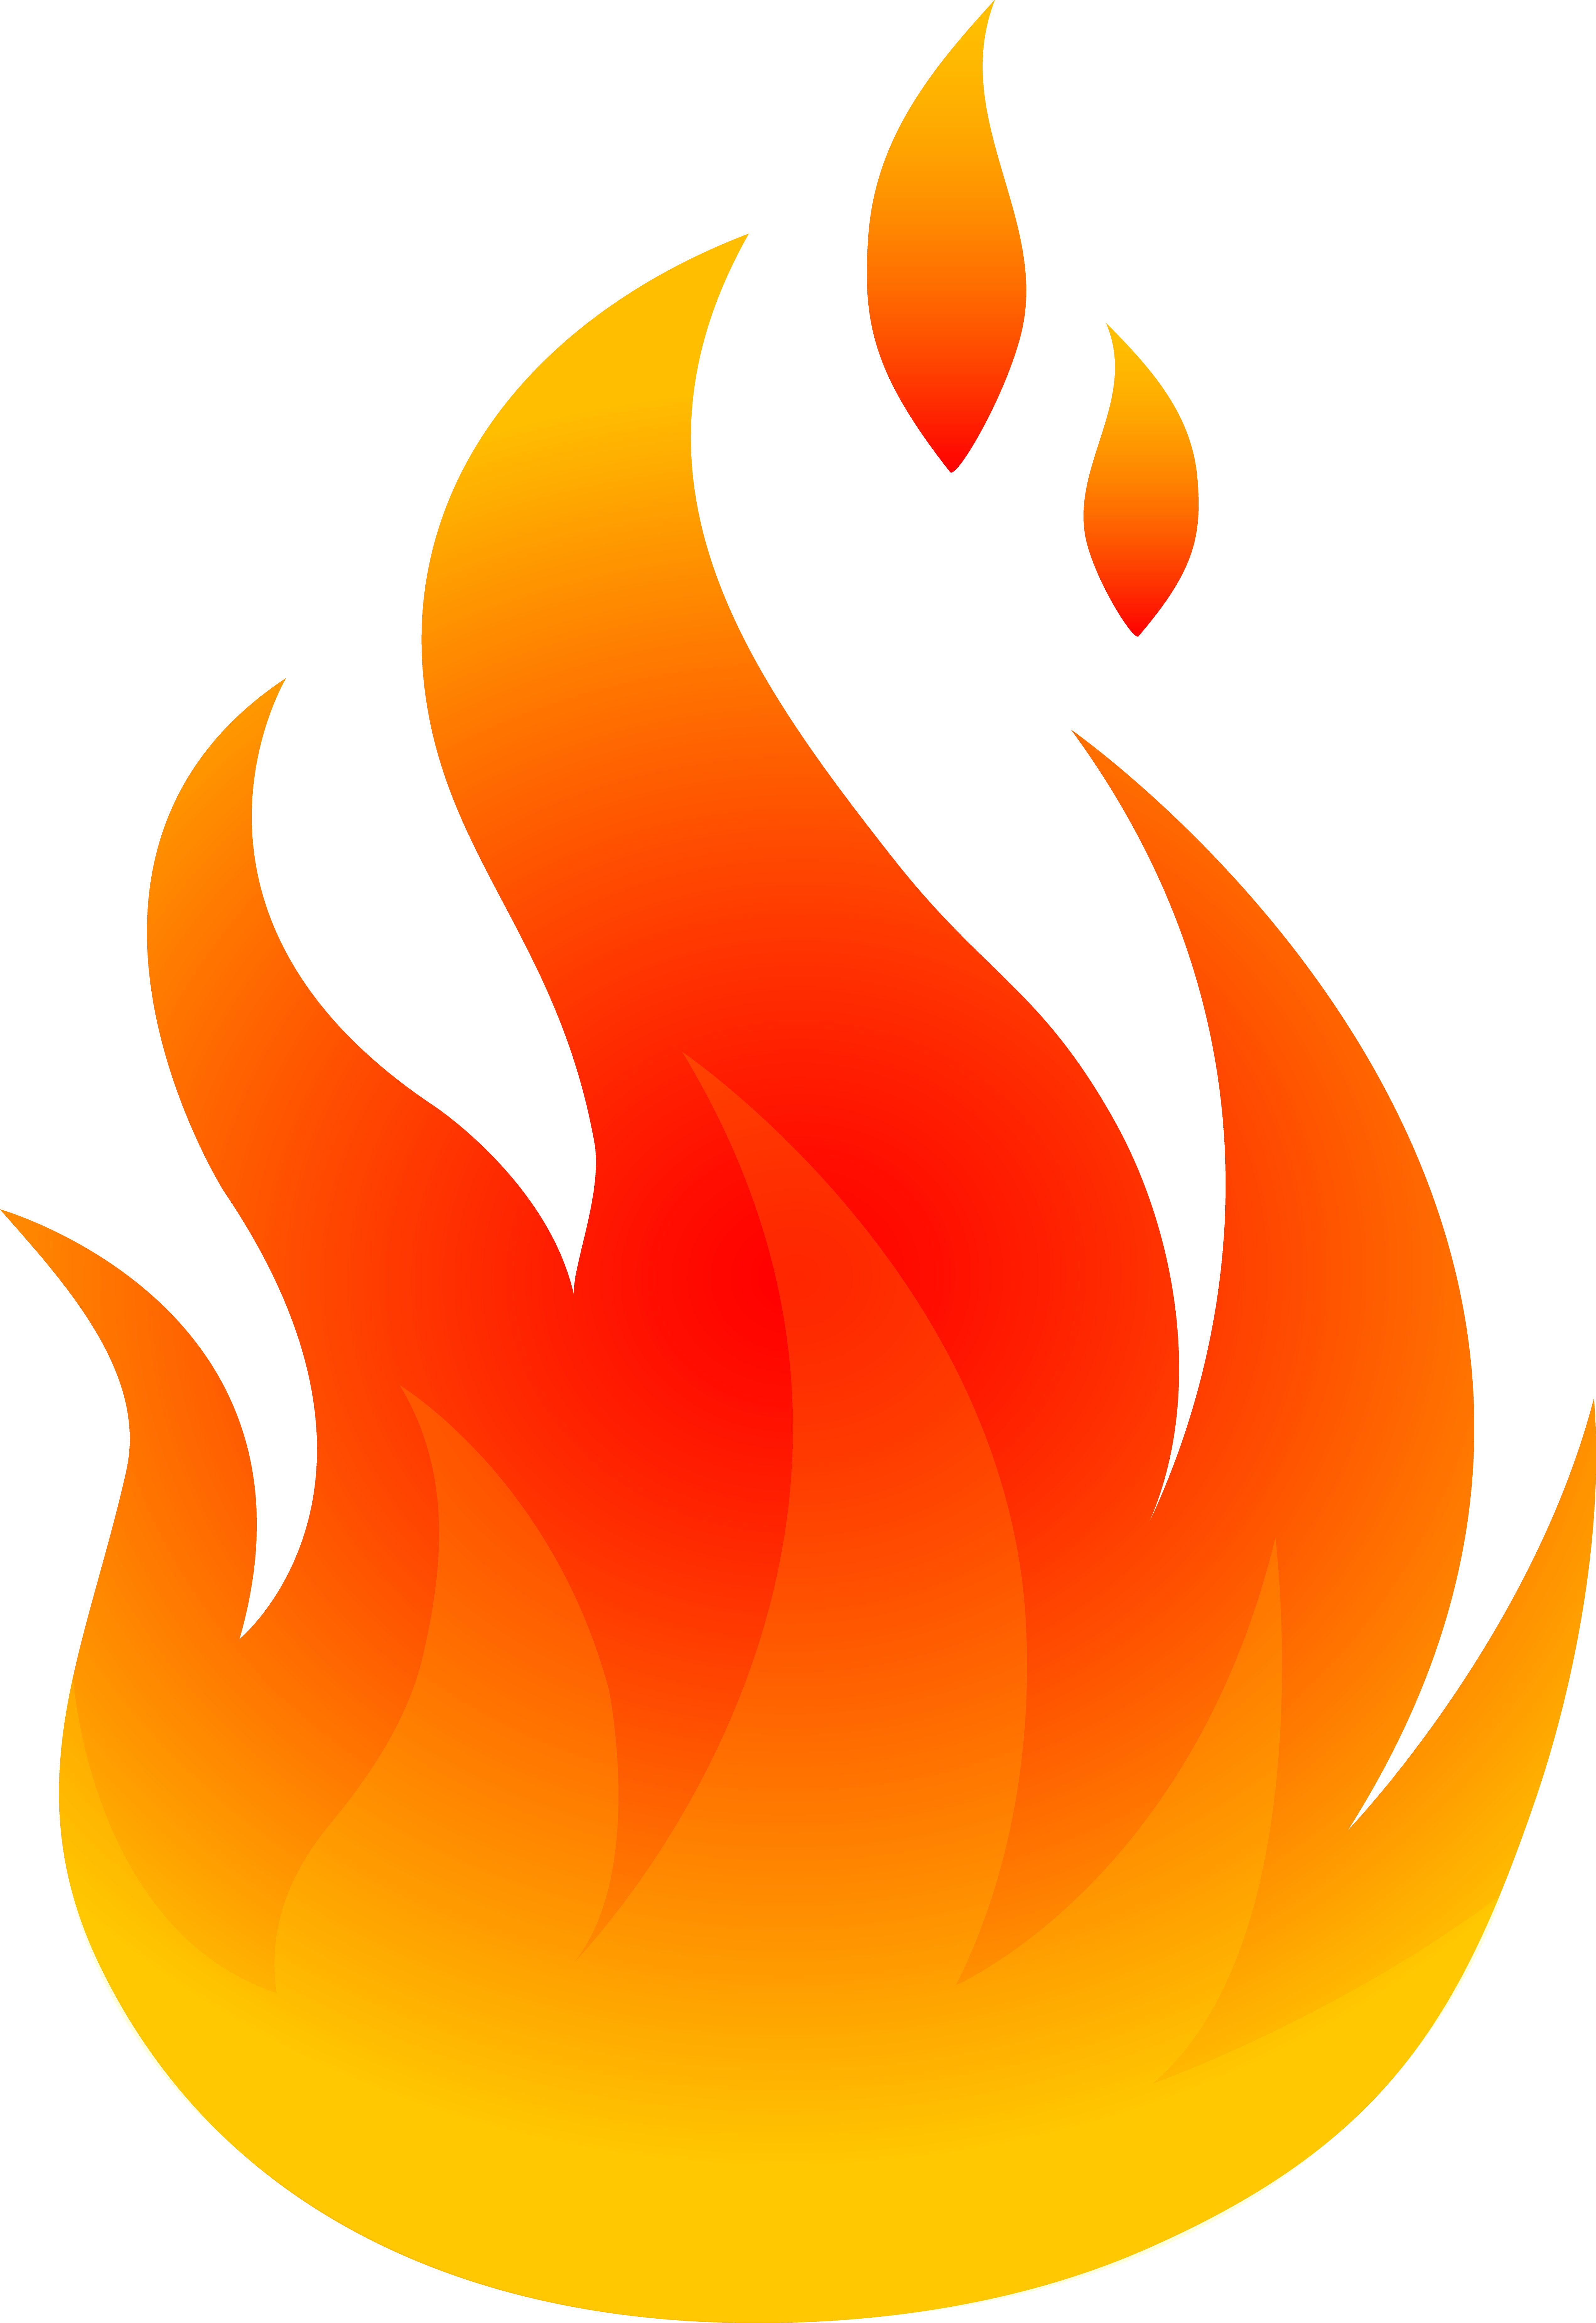 Big Fire Flame Png #4863 - Free Icons and PNG Backgrounds